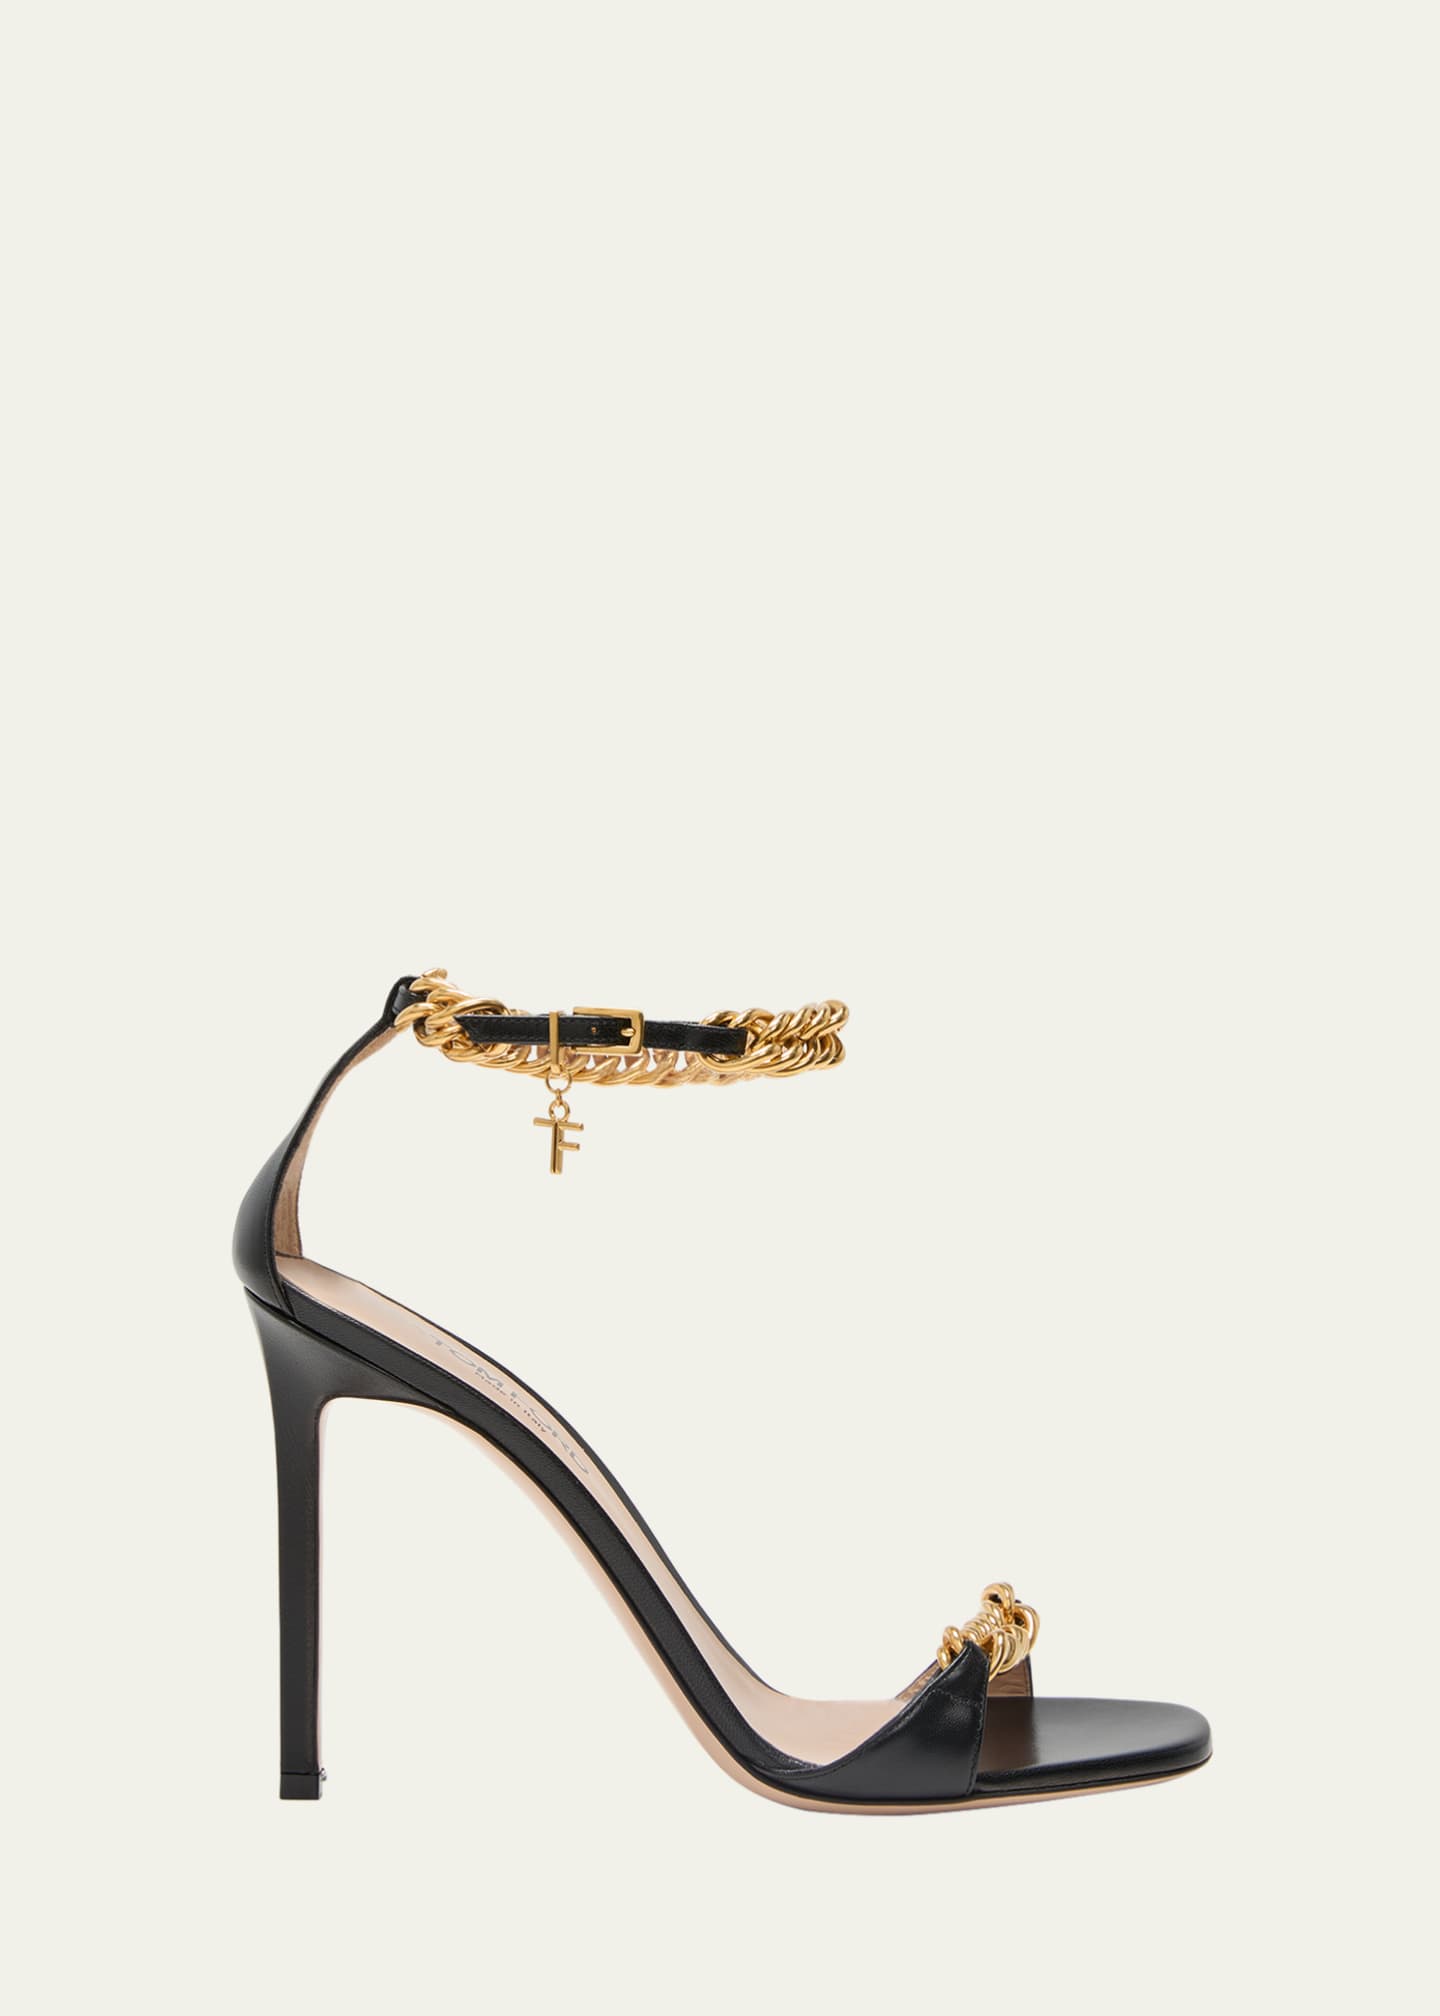 TOM FORD Leather Chain Ankle-Strap Stiletto Sandals - Bergdorf Goodman